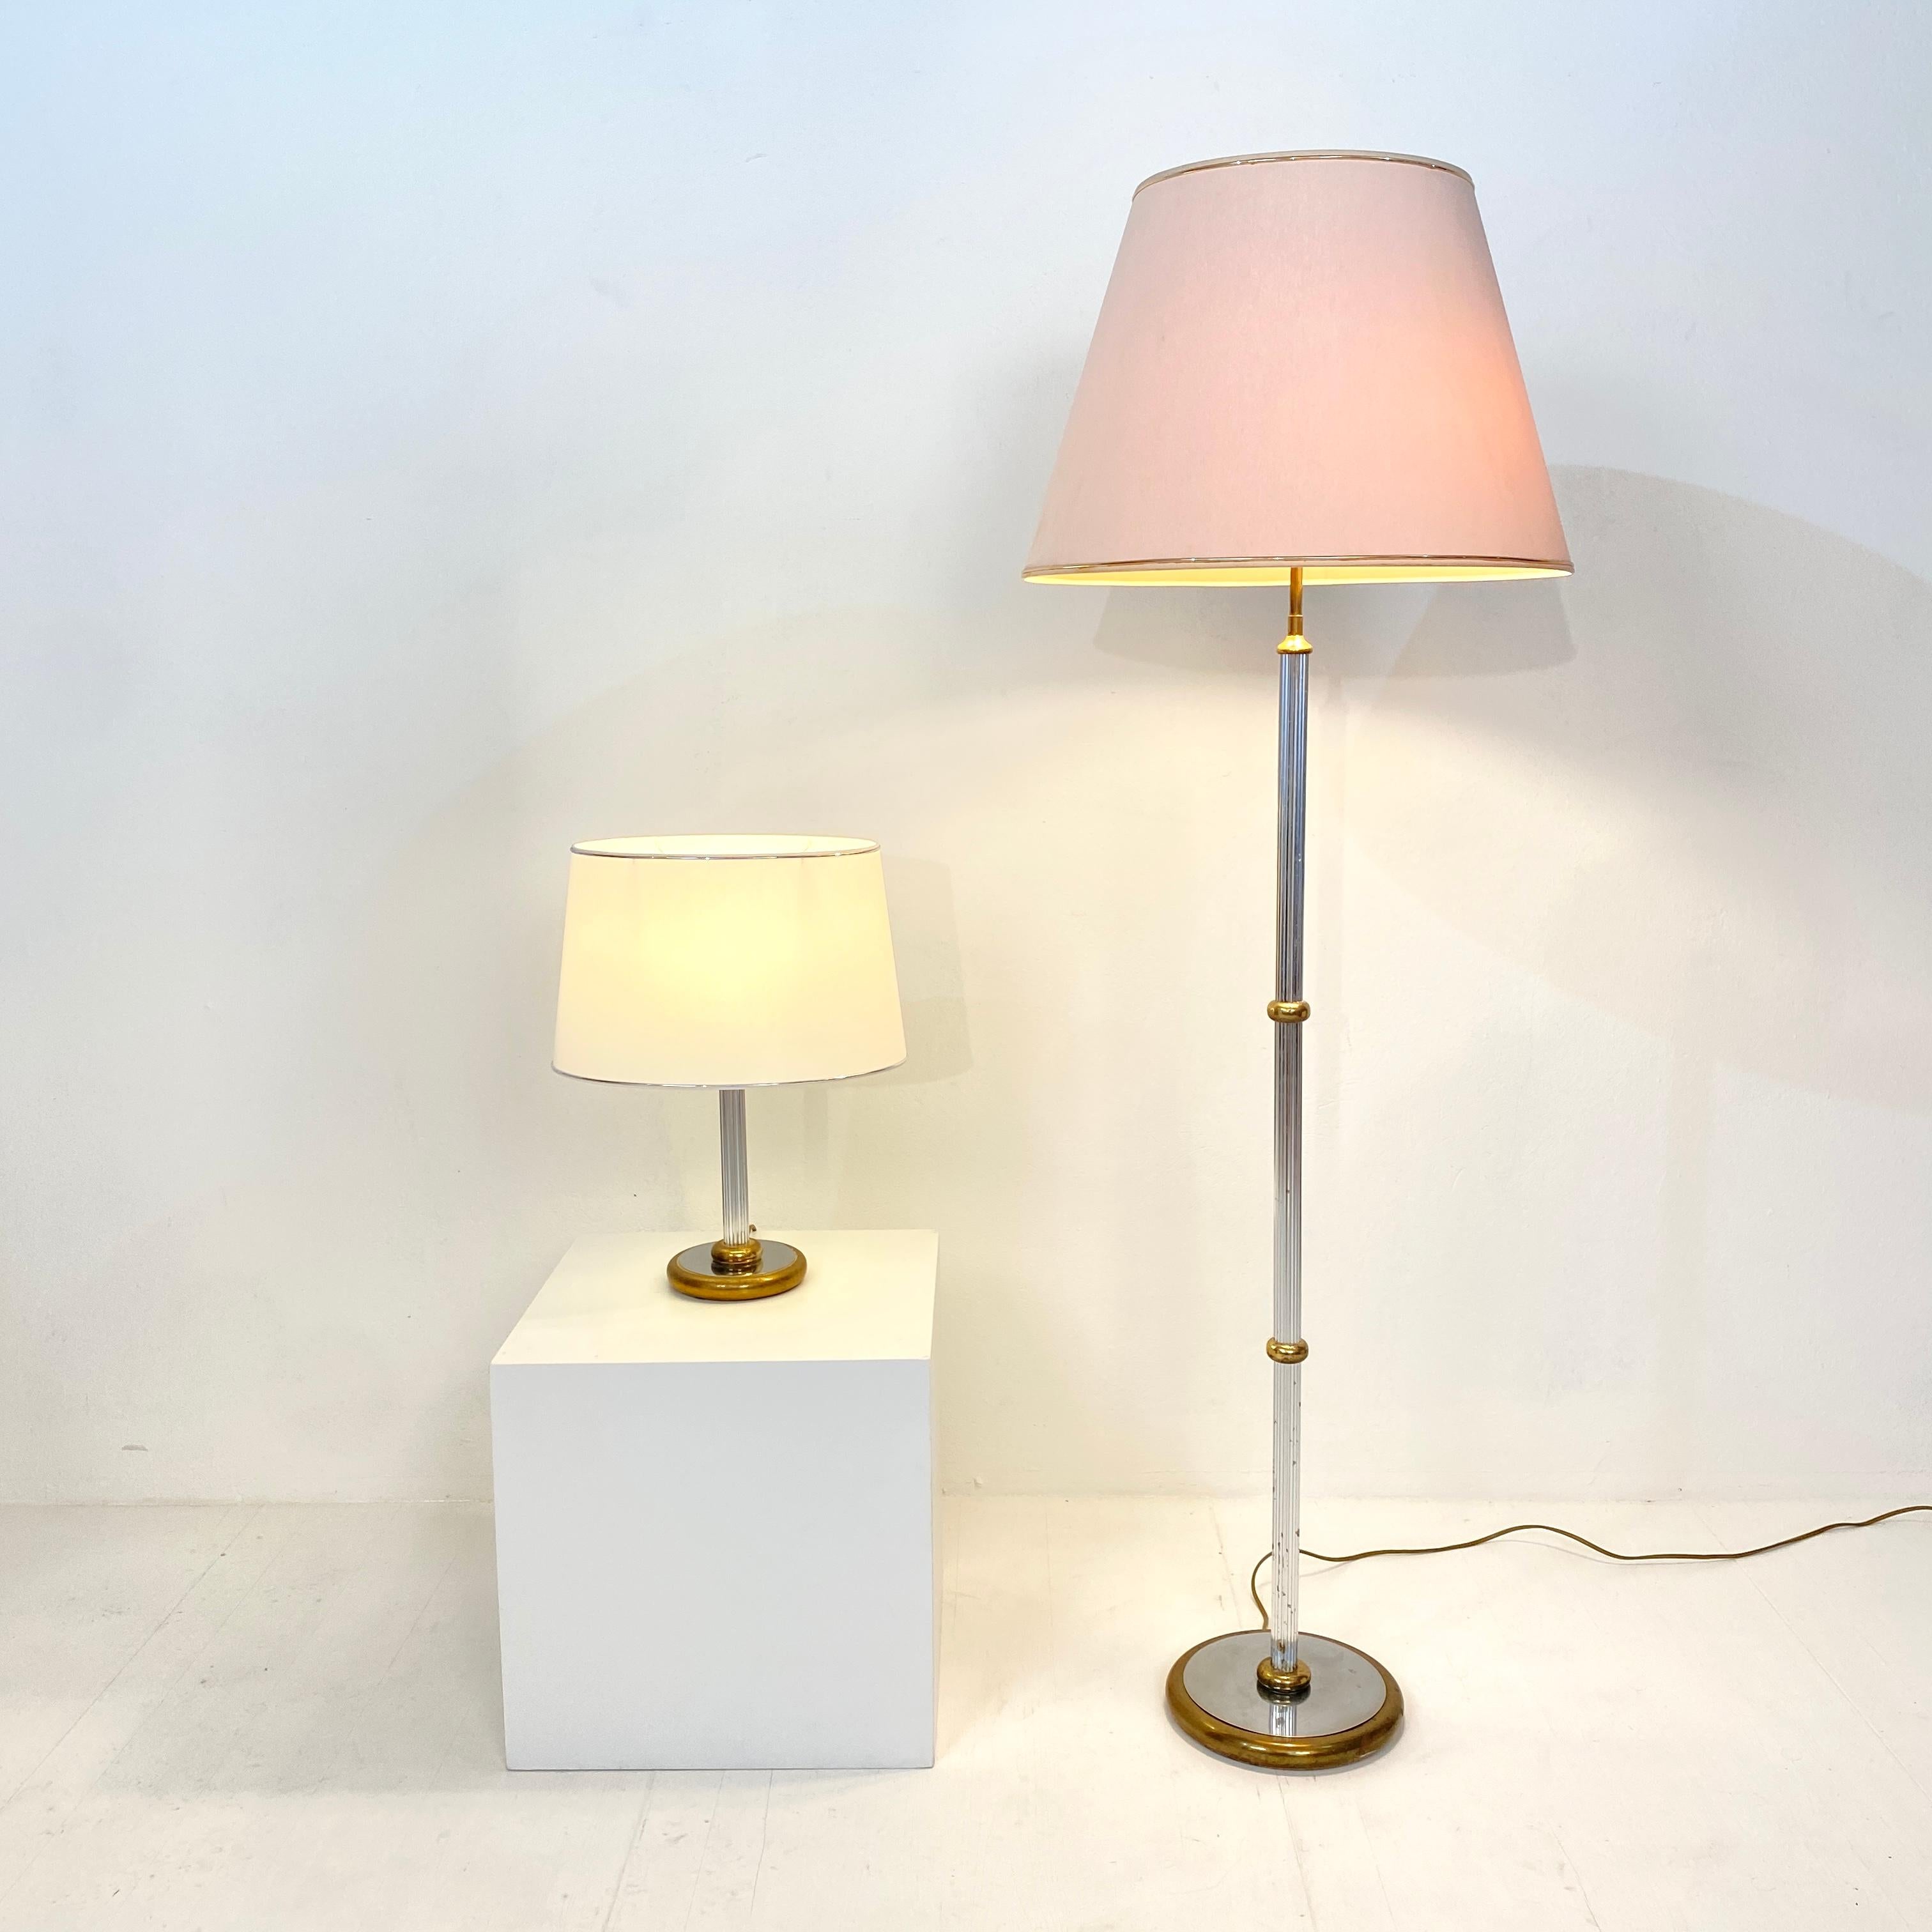 Midcentury German Table Lamp by Aro-Leuchte in Chrome and Brass, circa 1970 For Sale 2